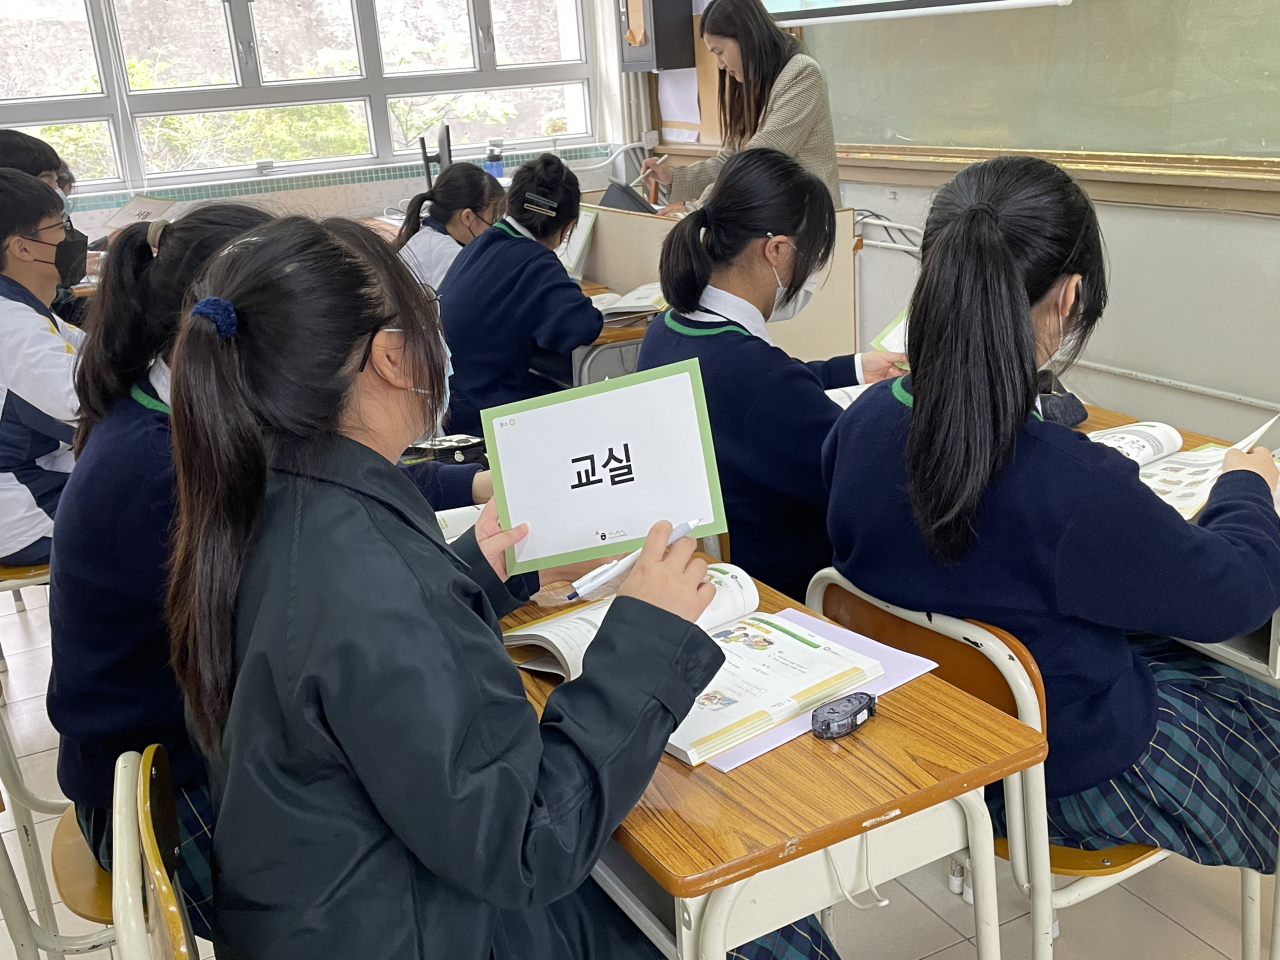 Students complete an exercise in Korean class at Mu Kuang English School in Hong Kong on March 21. (Naomi Ng/The Korea Herald)